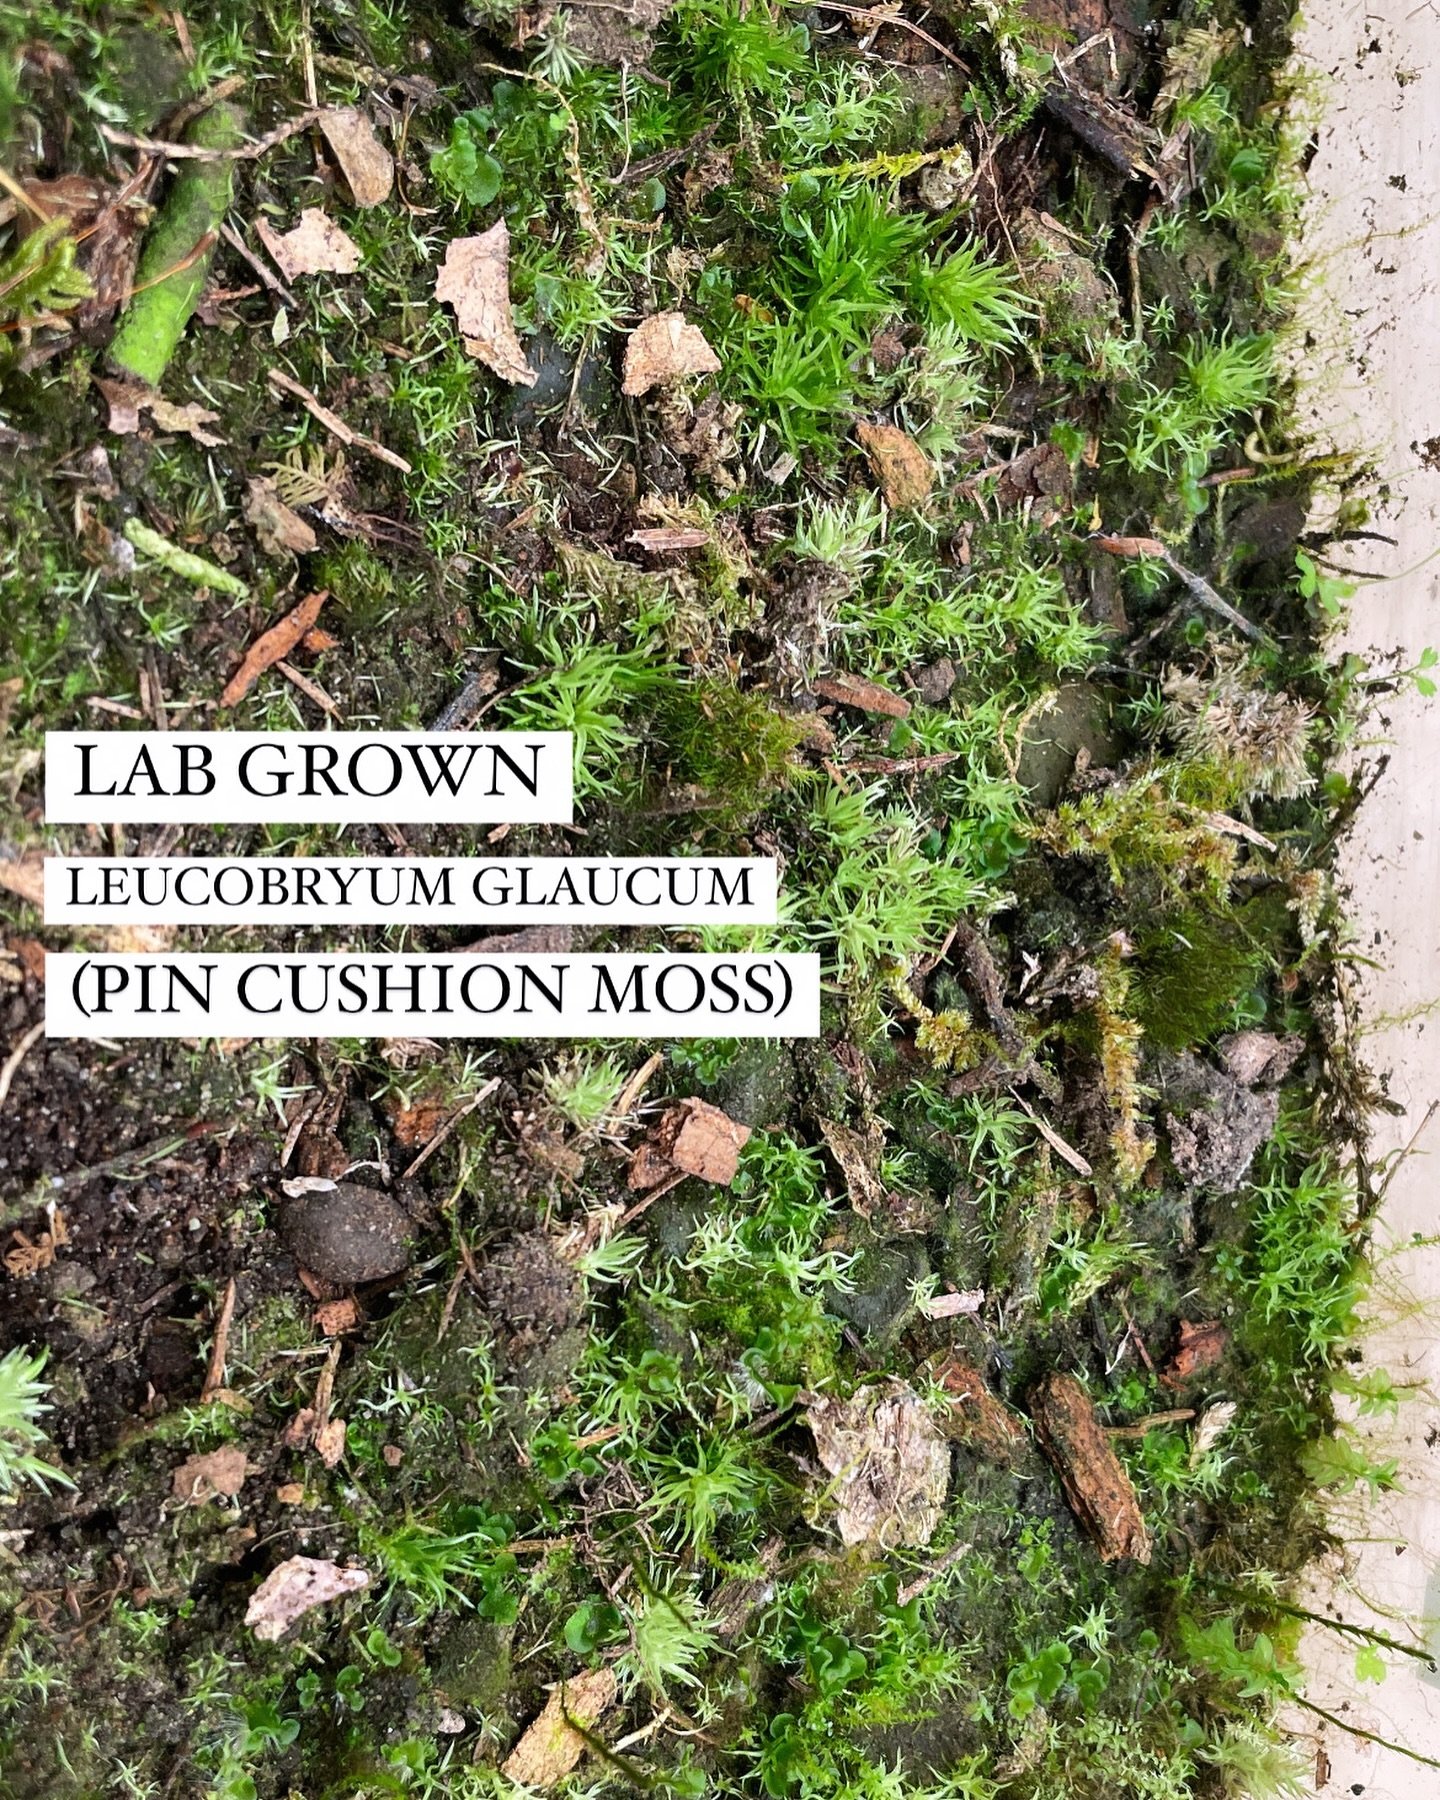 LAB GROWN MOSS! It doesn&rsquo;t look like much&hellip; but I tried a new method in November: brushing the shedding leaves of Leucobryum glaucum onto acidic soil, misting it, and placing it under grow lights in a closed tub. I just read in the book &